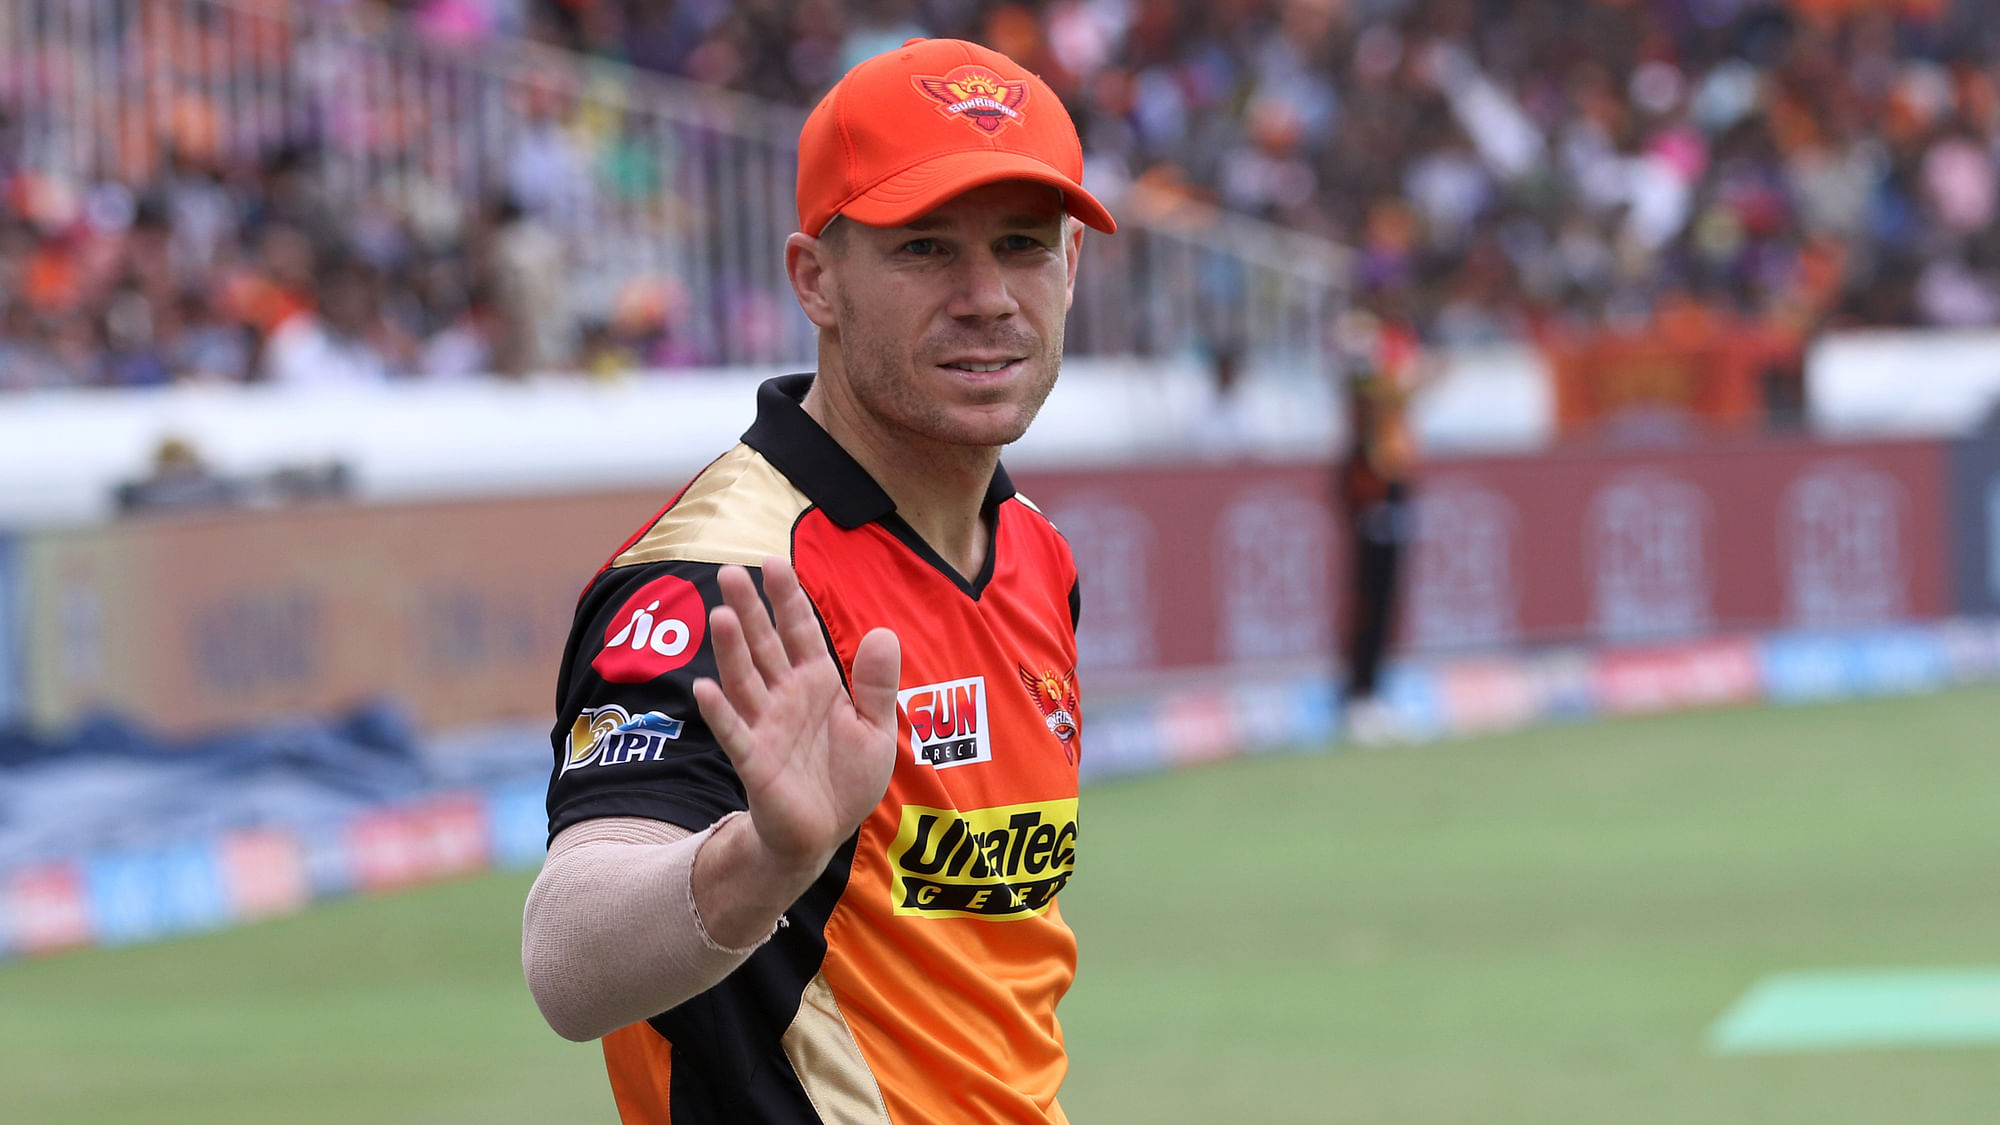 David Warner will be returning home to Australia after getting injured while playing the BPL.